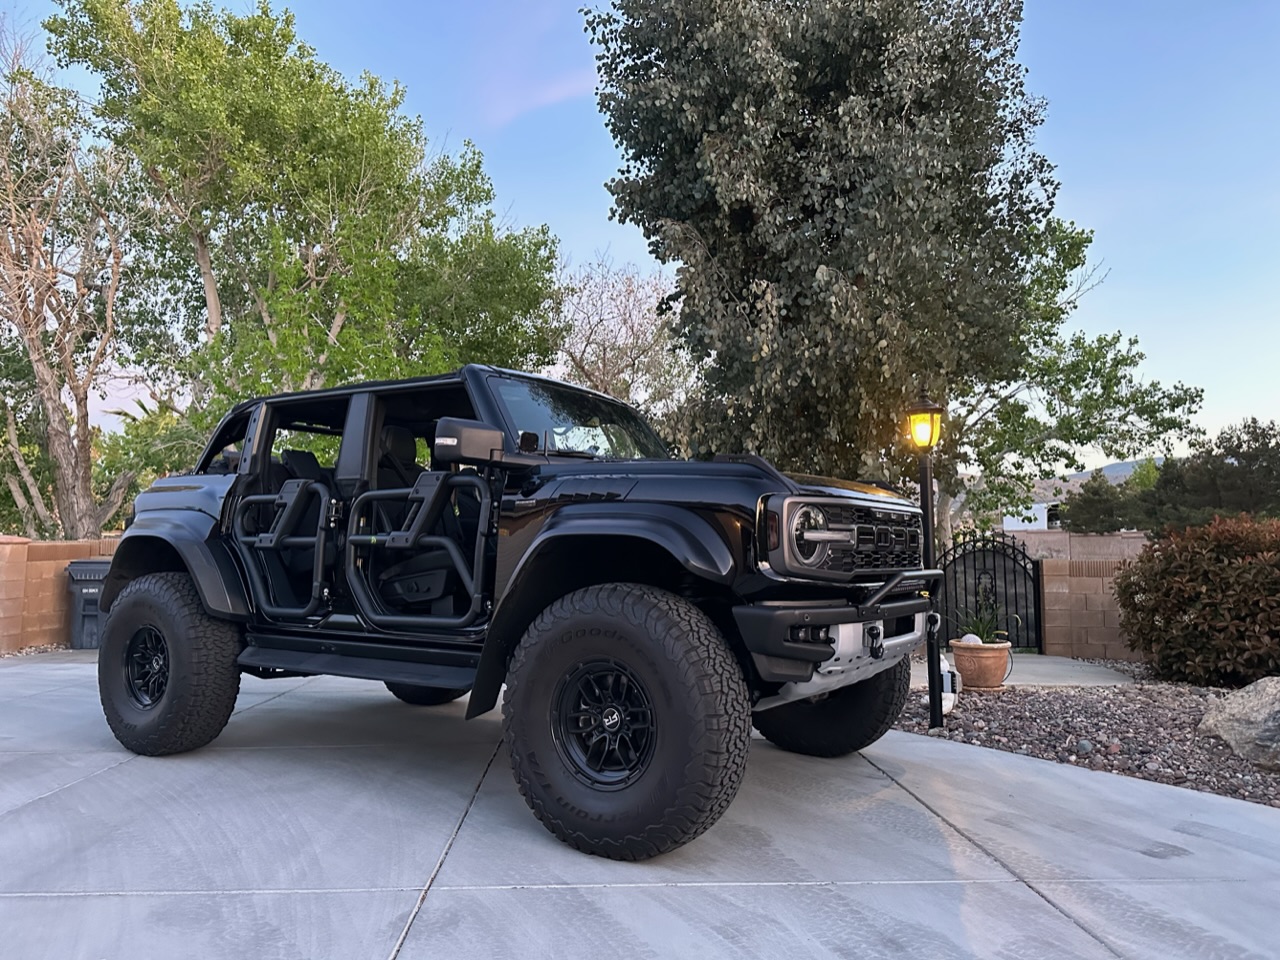 Ford Bronco What Did You Do To Your Bronco Raptor Today? 🔧 🧰 🪛 8B301C04-51B9-490F-A8F7-54555962A78A